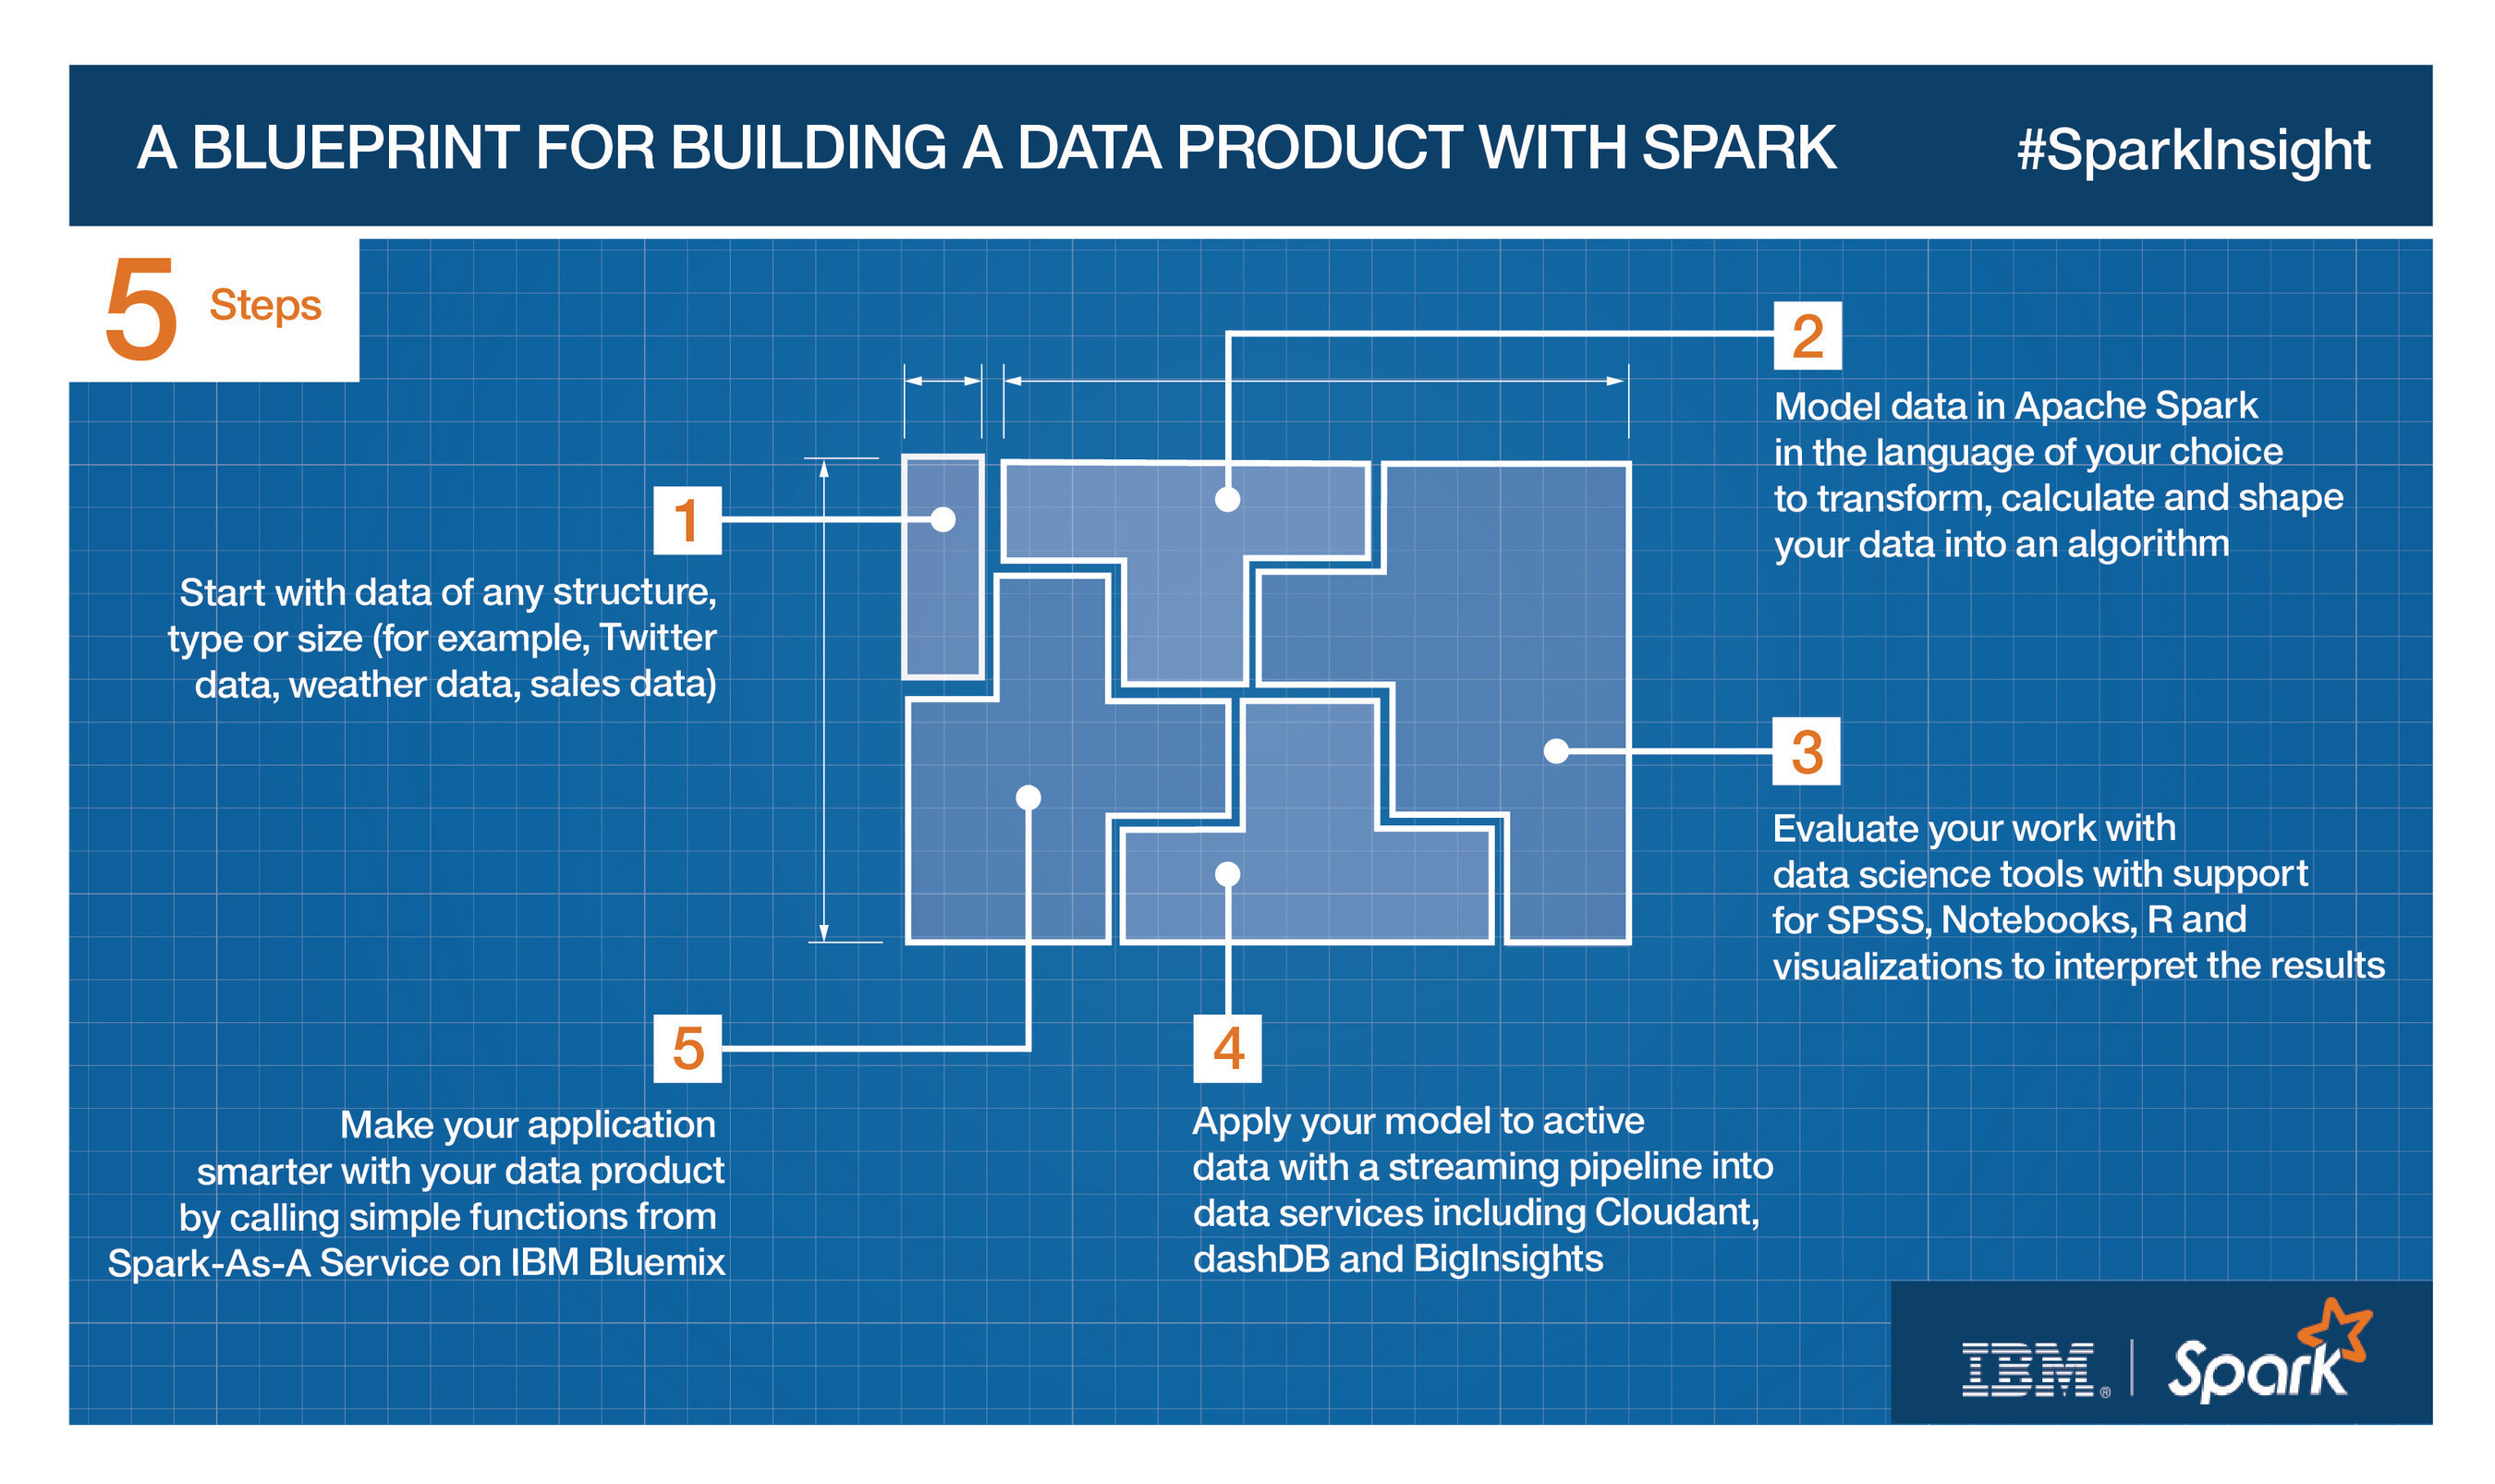 Spark is an agile, fast and easy to use open source technology that can also help radically simplify the process of developing intelligent apps. This blueprint maps out 5 simple steps for building a data product with Spark.